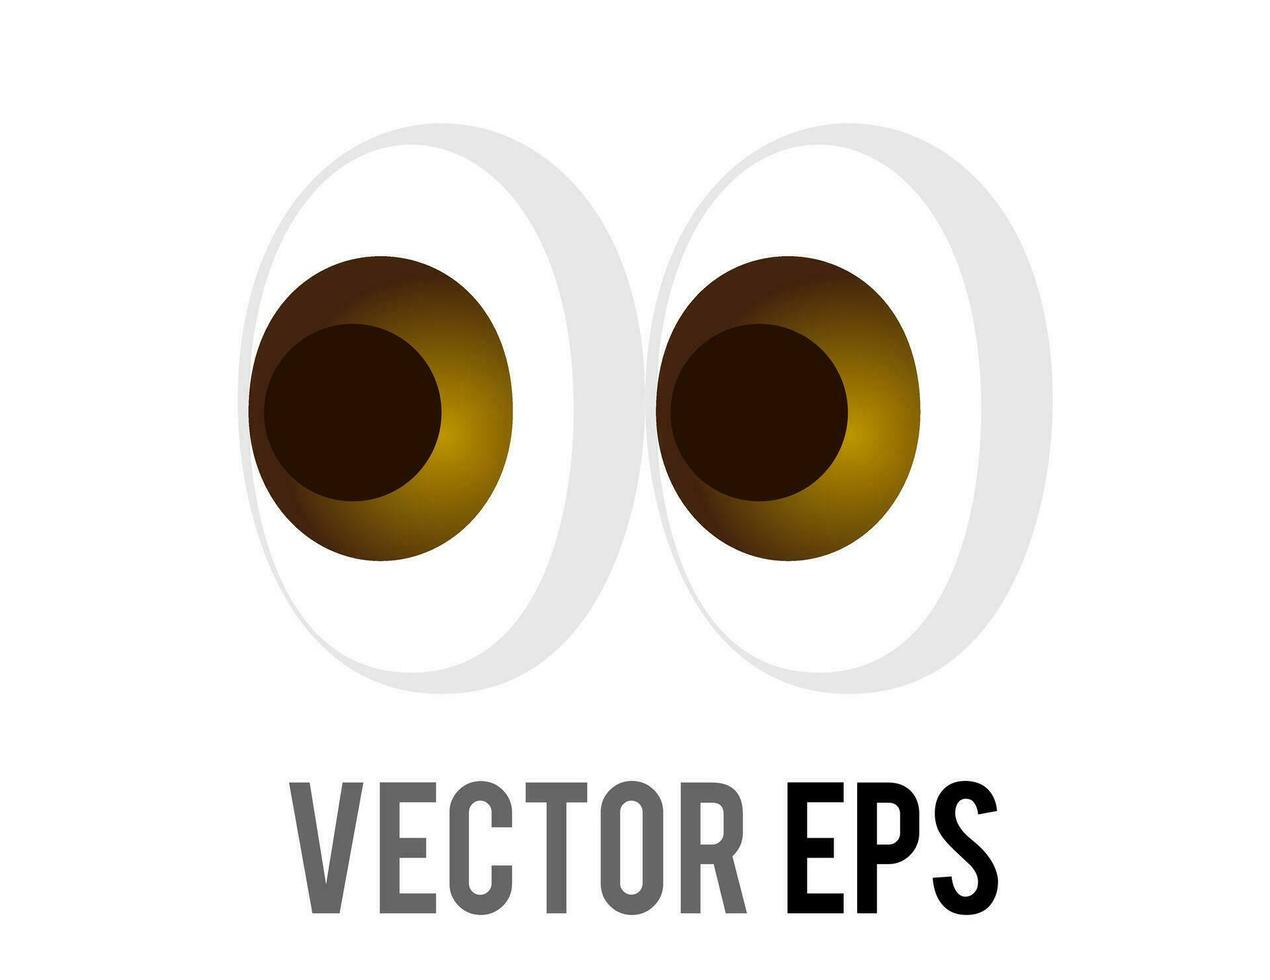 Vector pair of pervy or shifty eyes icon, glancing slightly to the left